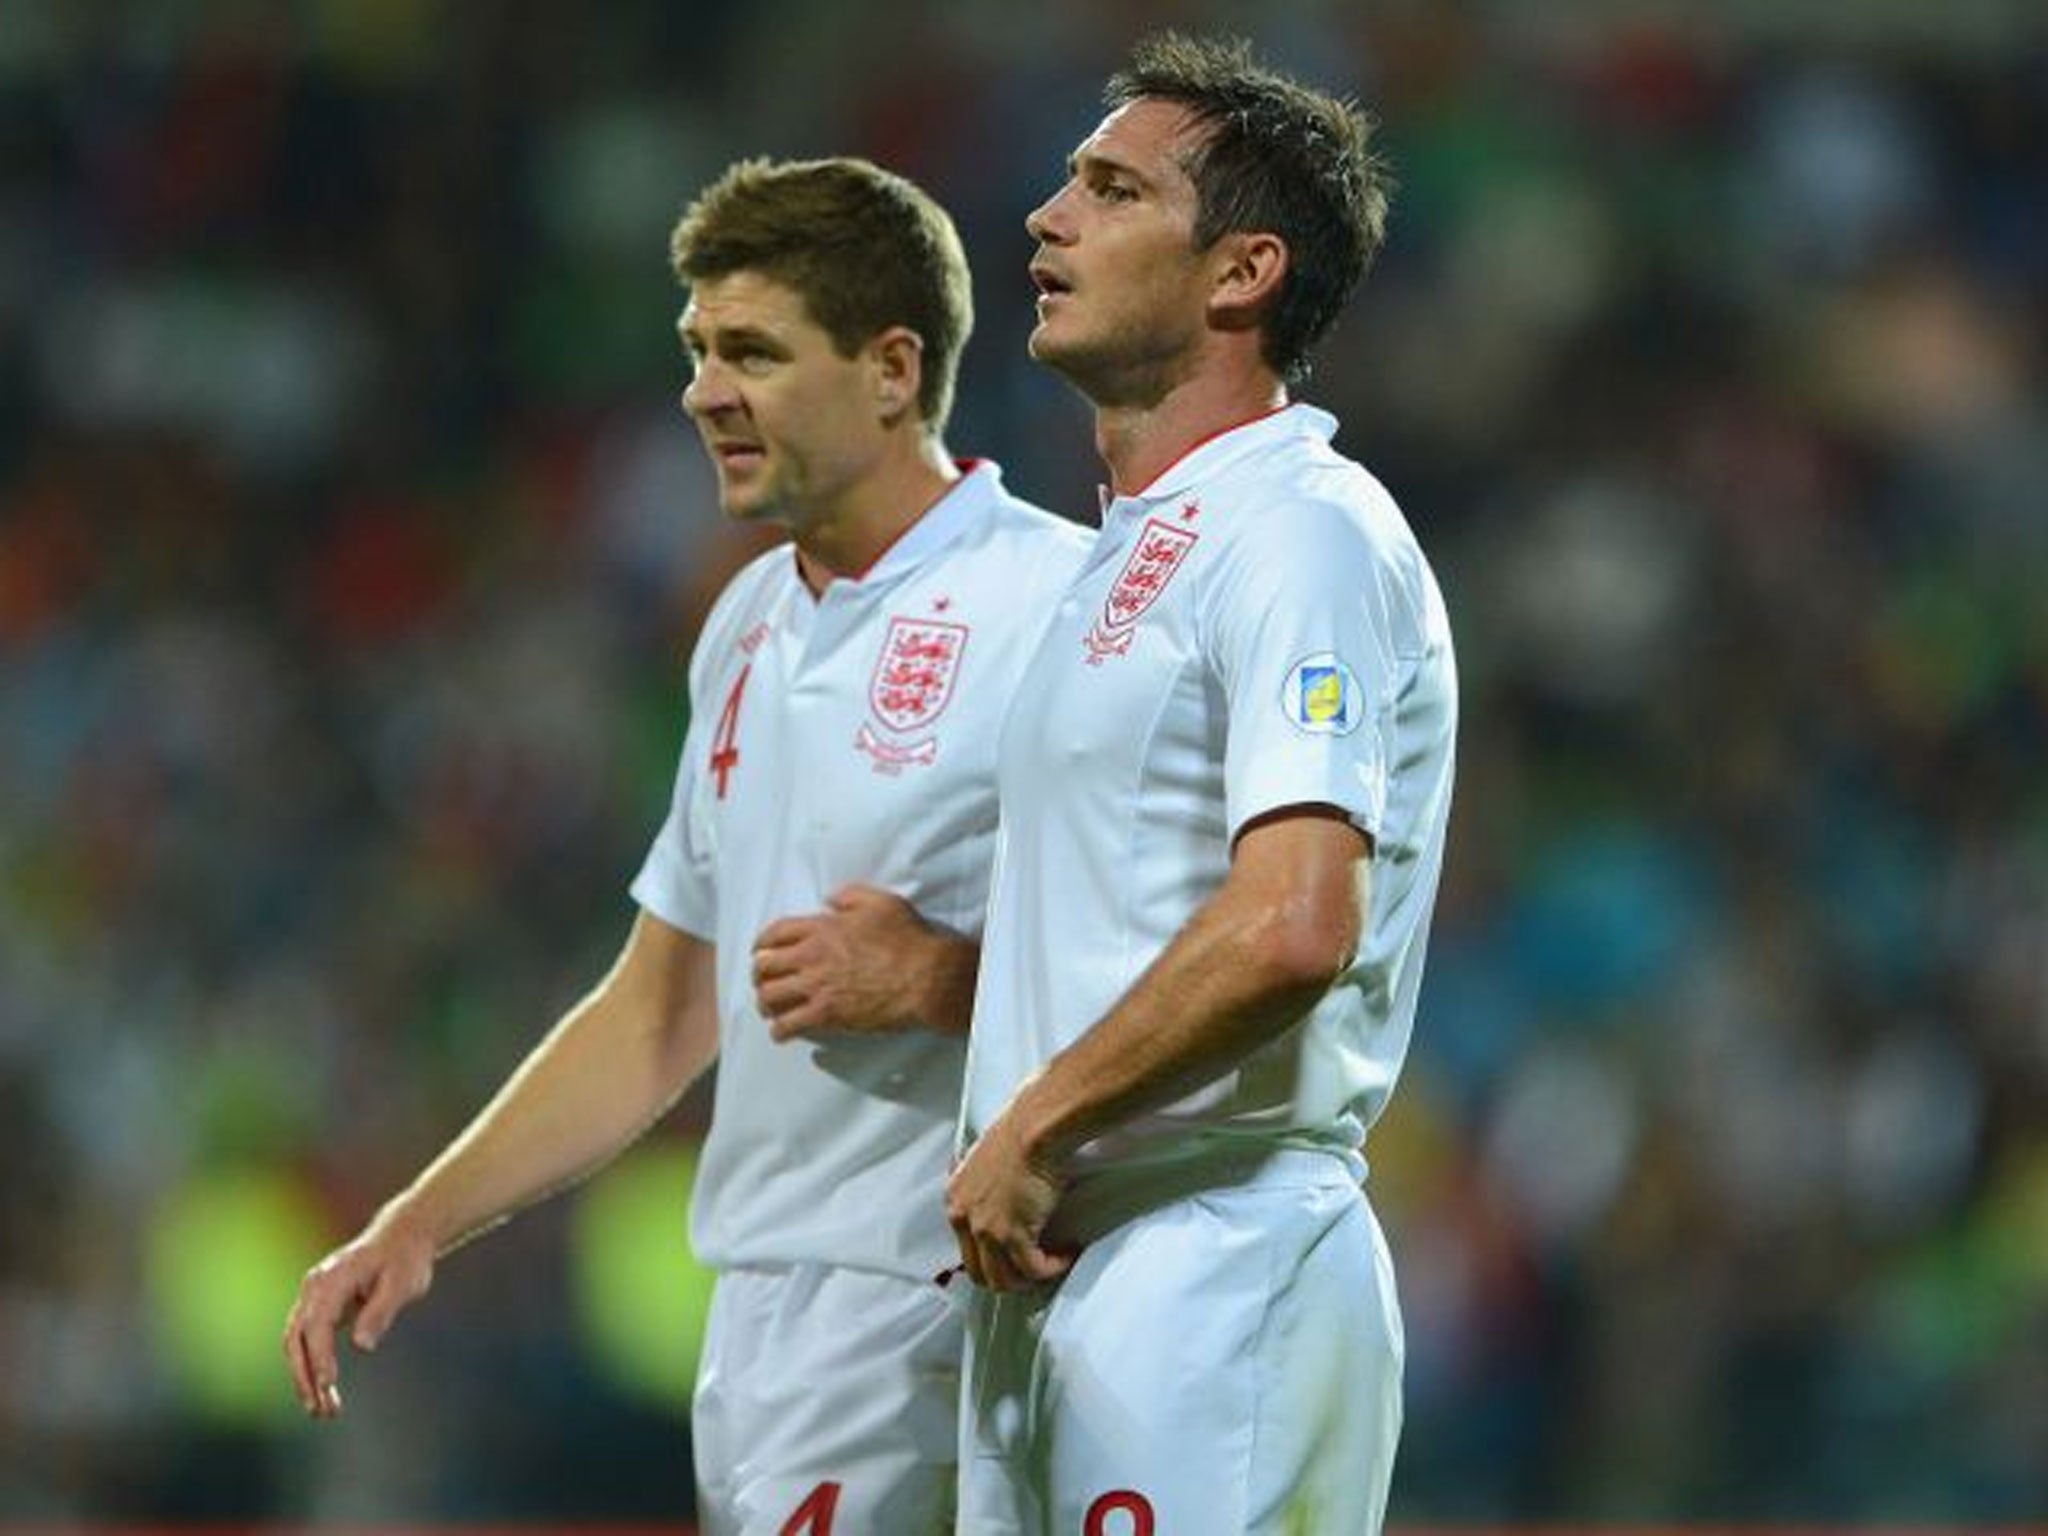 Gerrard is also pleased that Lampard stayed at Chelsea for this season, given the speculation that he might go abroad